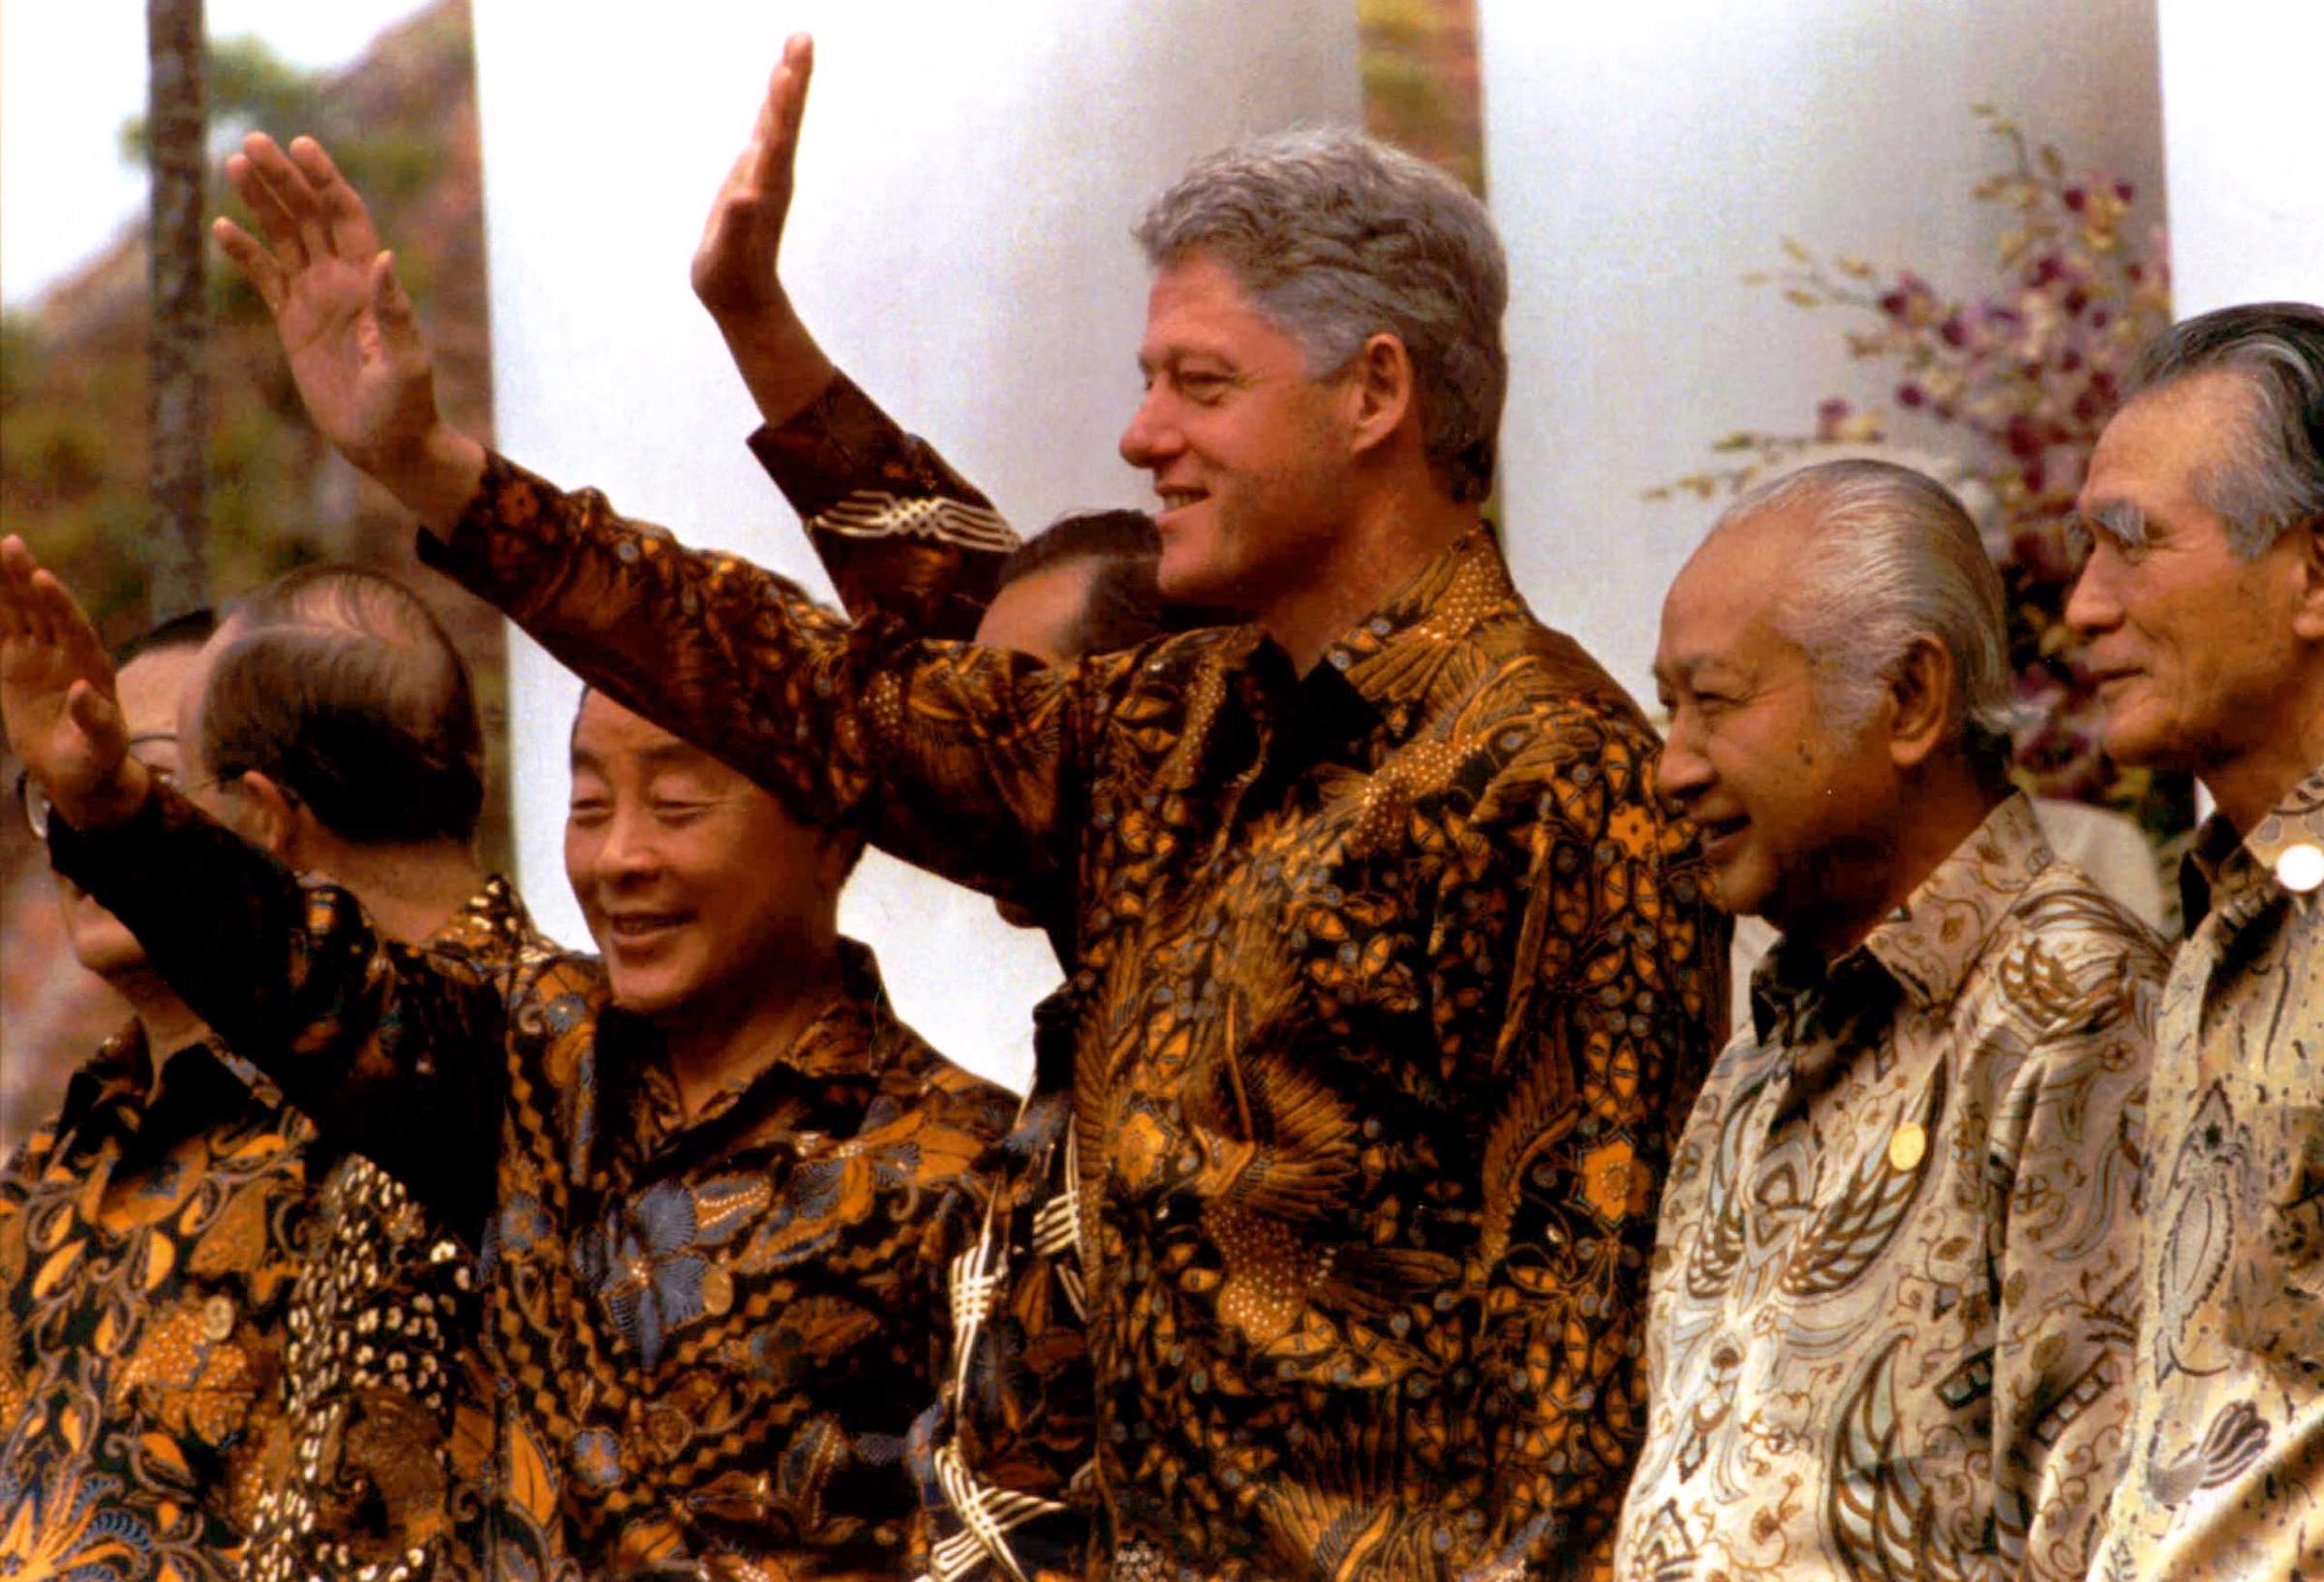 Asia-Pacific Economic Cooperation (APEC) leaders dressed in traditional Indonesian batik wave during a photo session prior to their meeting in Bogor, Indonesia on Nov. 15, 1994.